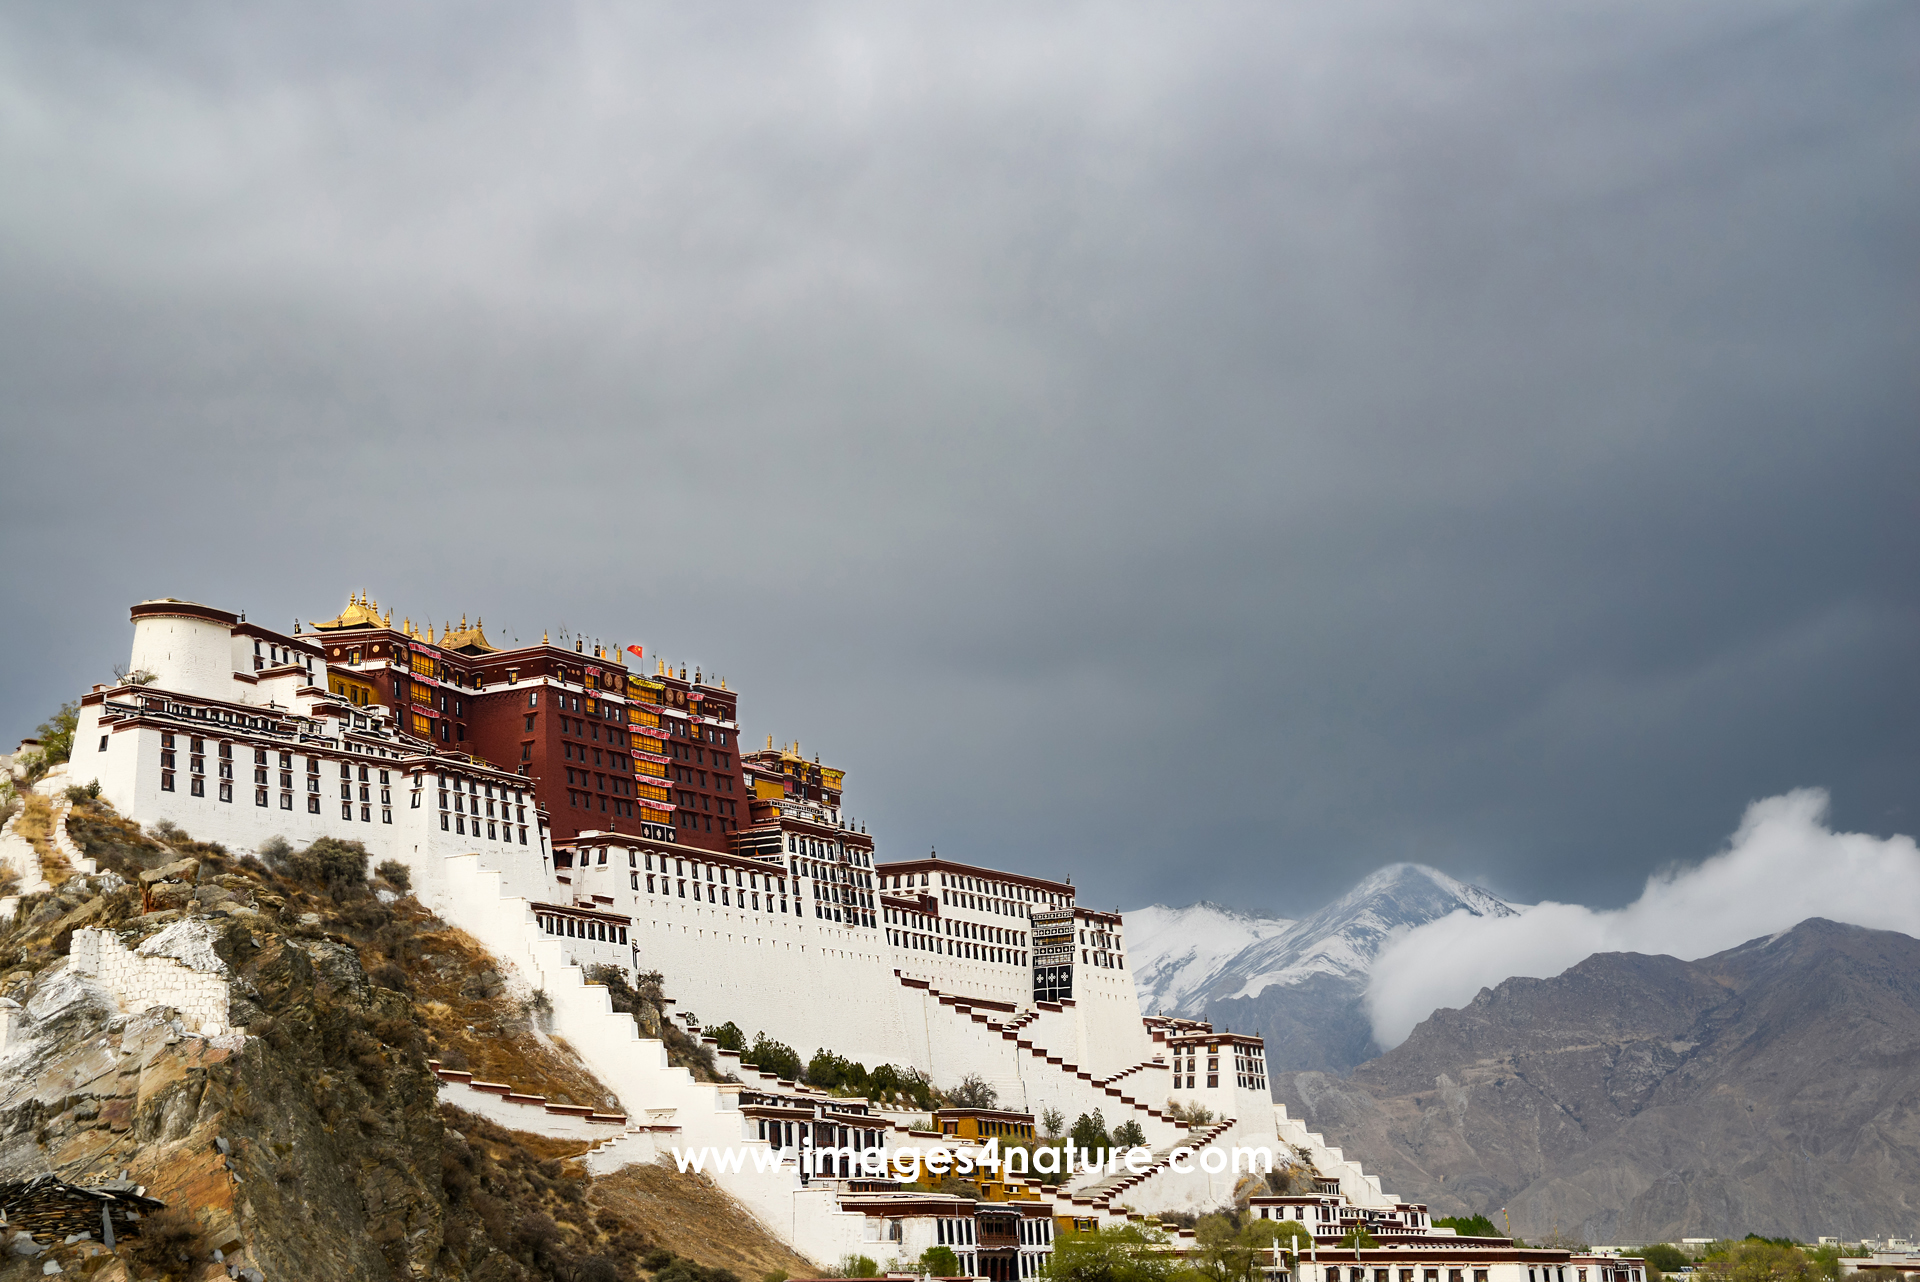 Diagonal scenic view of Lhasa's Potala Palace against cloudy snow-capped mountain peaks